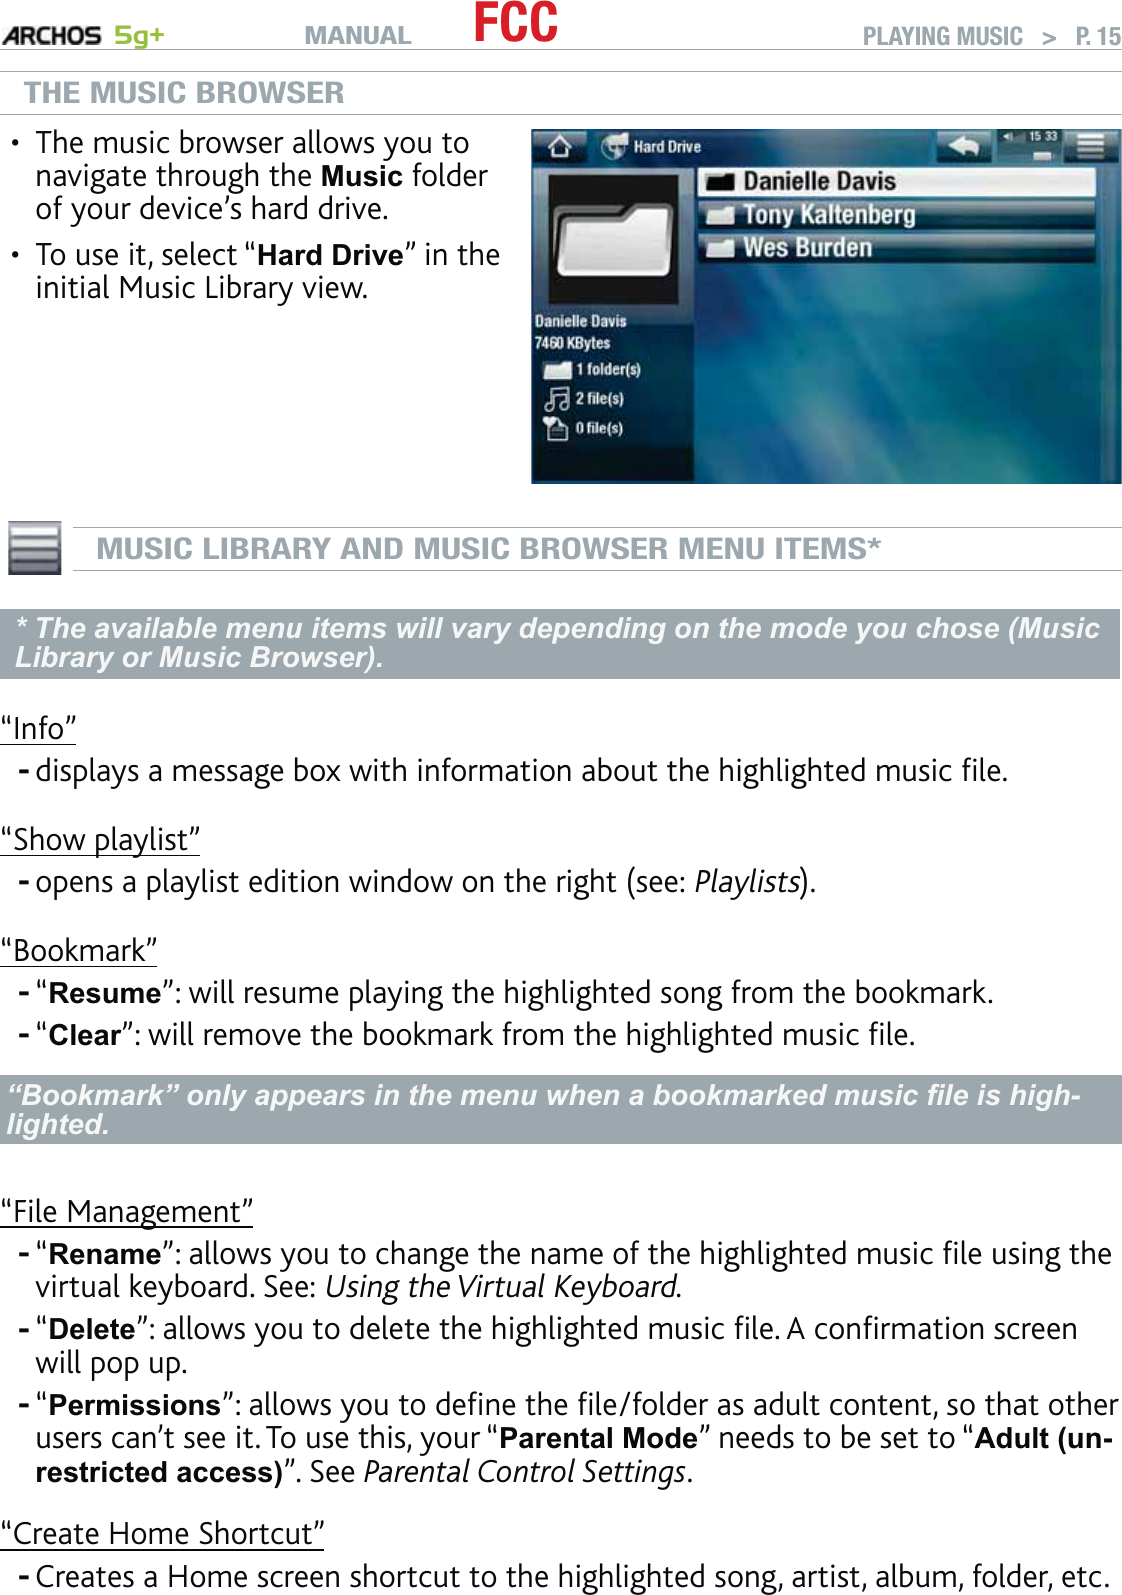 MANUAL 5g+ FCC PLAYING MUSIC   &gt;   P. 15THE MUSIC BROWSERThe music browser allows you to navigate through the Music folder of your device’s hard drive. To use it, select “Hard Drive” in the initial Music Library view.••MUSIC LIBRARY AND MUSIC BROWSER MENU ITEMS** The available menu items will vary depending on the mode you chose (Music Library or Music Browser).“Info”displays a message box with information about the highlighted music ﬁle.“Show playlist”opens a playlist edition window on the right (see: Playlists).“Bookmark”“Resume”: will resume playing the highlighted song from the bookmark.“Clear”: will remove the bookmark from the highlighted music ﬁle.“Bookmark” only appears in the menu when a bookmarked music ﬁle is high-lighted.“File Management”“Rename”: allows you to change the name of the highlighted music ﬁle using the virtual keyboard. See: Using the Virtual Keyboard.“Delete”: allows you to delete the highlighted music ﬁle. A conﬁrmation screen will pop up.“Permissions”: allows you to deﬁne the ﬁle/folder as adult content, so that other users can’t see it. To use this, your “Parental Mode” needs to be set to “Adult (un-restricted access)”. See Parental Control Settings.“Create Home Shortcut”Creates a Home screen shortcut to the highlighted song, artist, album, folder, etc.--------